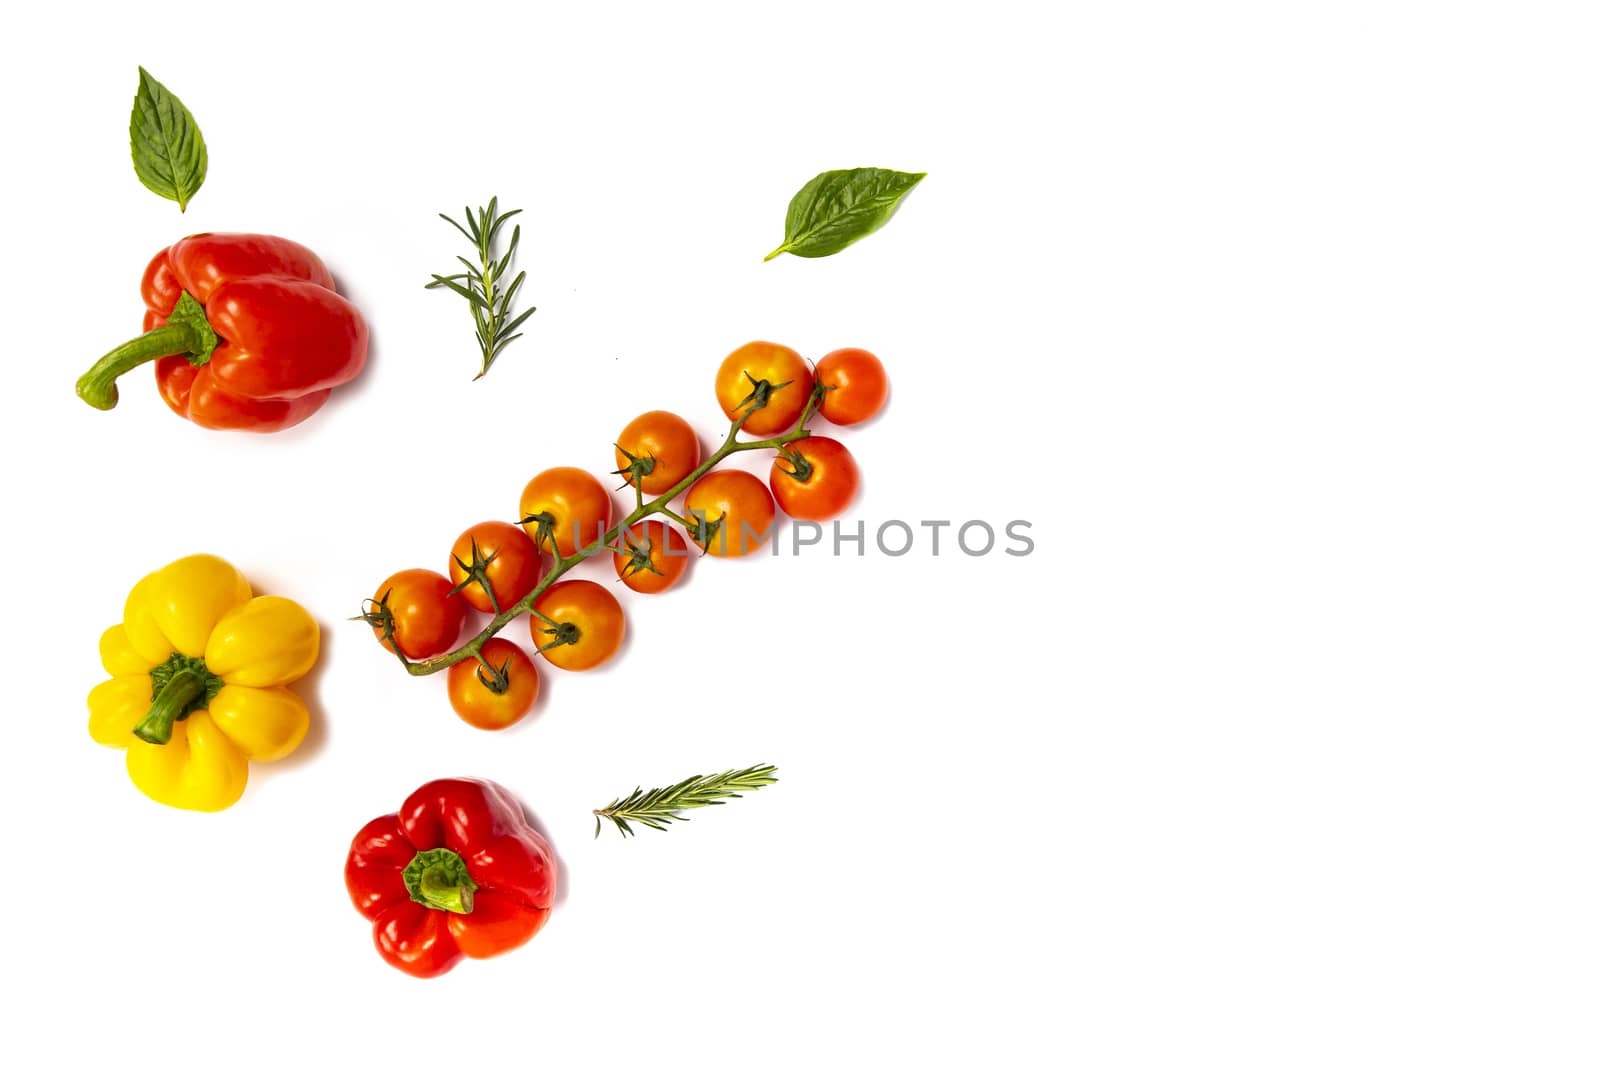 Colorful fresh summer fruits and vegetable on white background. Flat lay. Food concept.